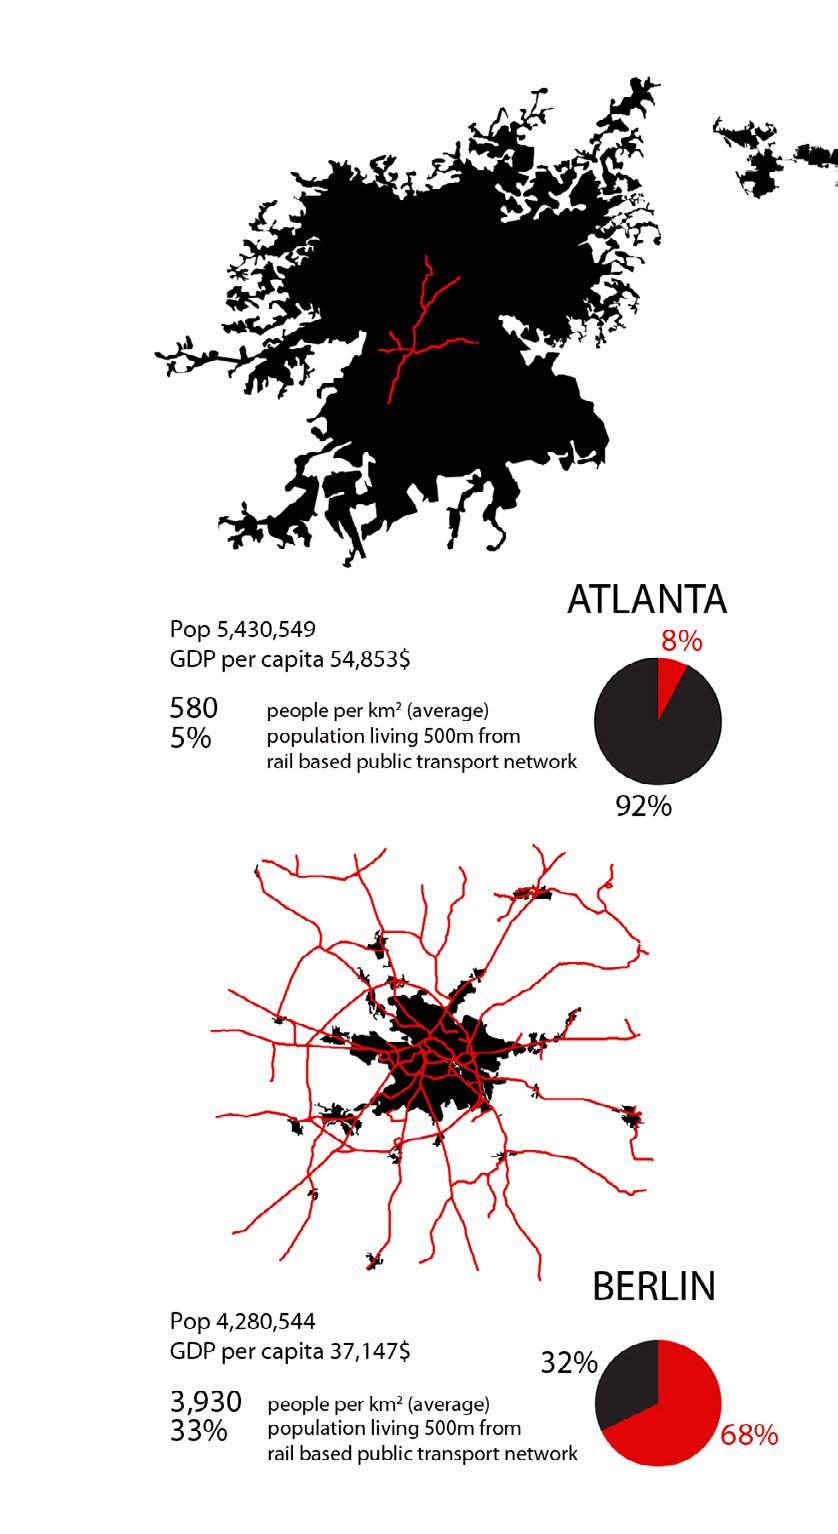 Comparing density and transport: Atlanta s urban sprawl drives car-dependency, while Berlin s more compact urban form promotes public transport (black in pie chart is private motorised vehicle use;